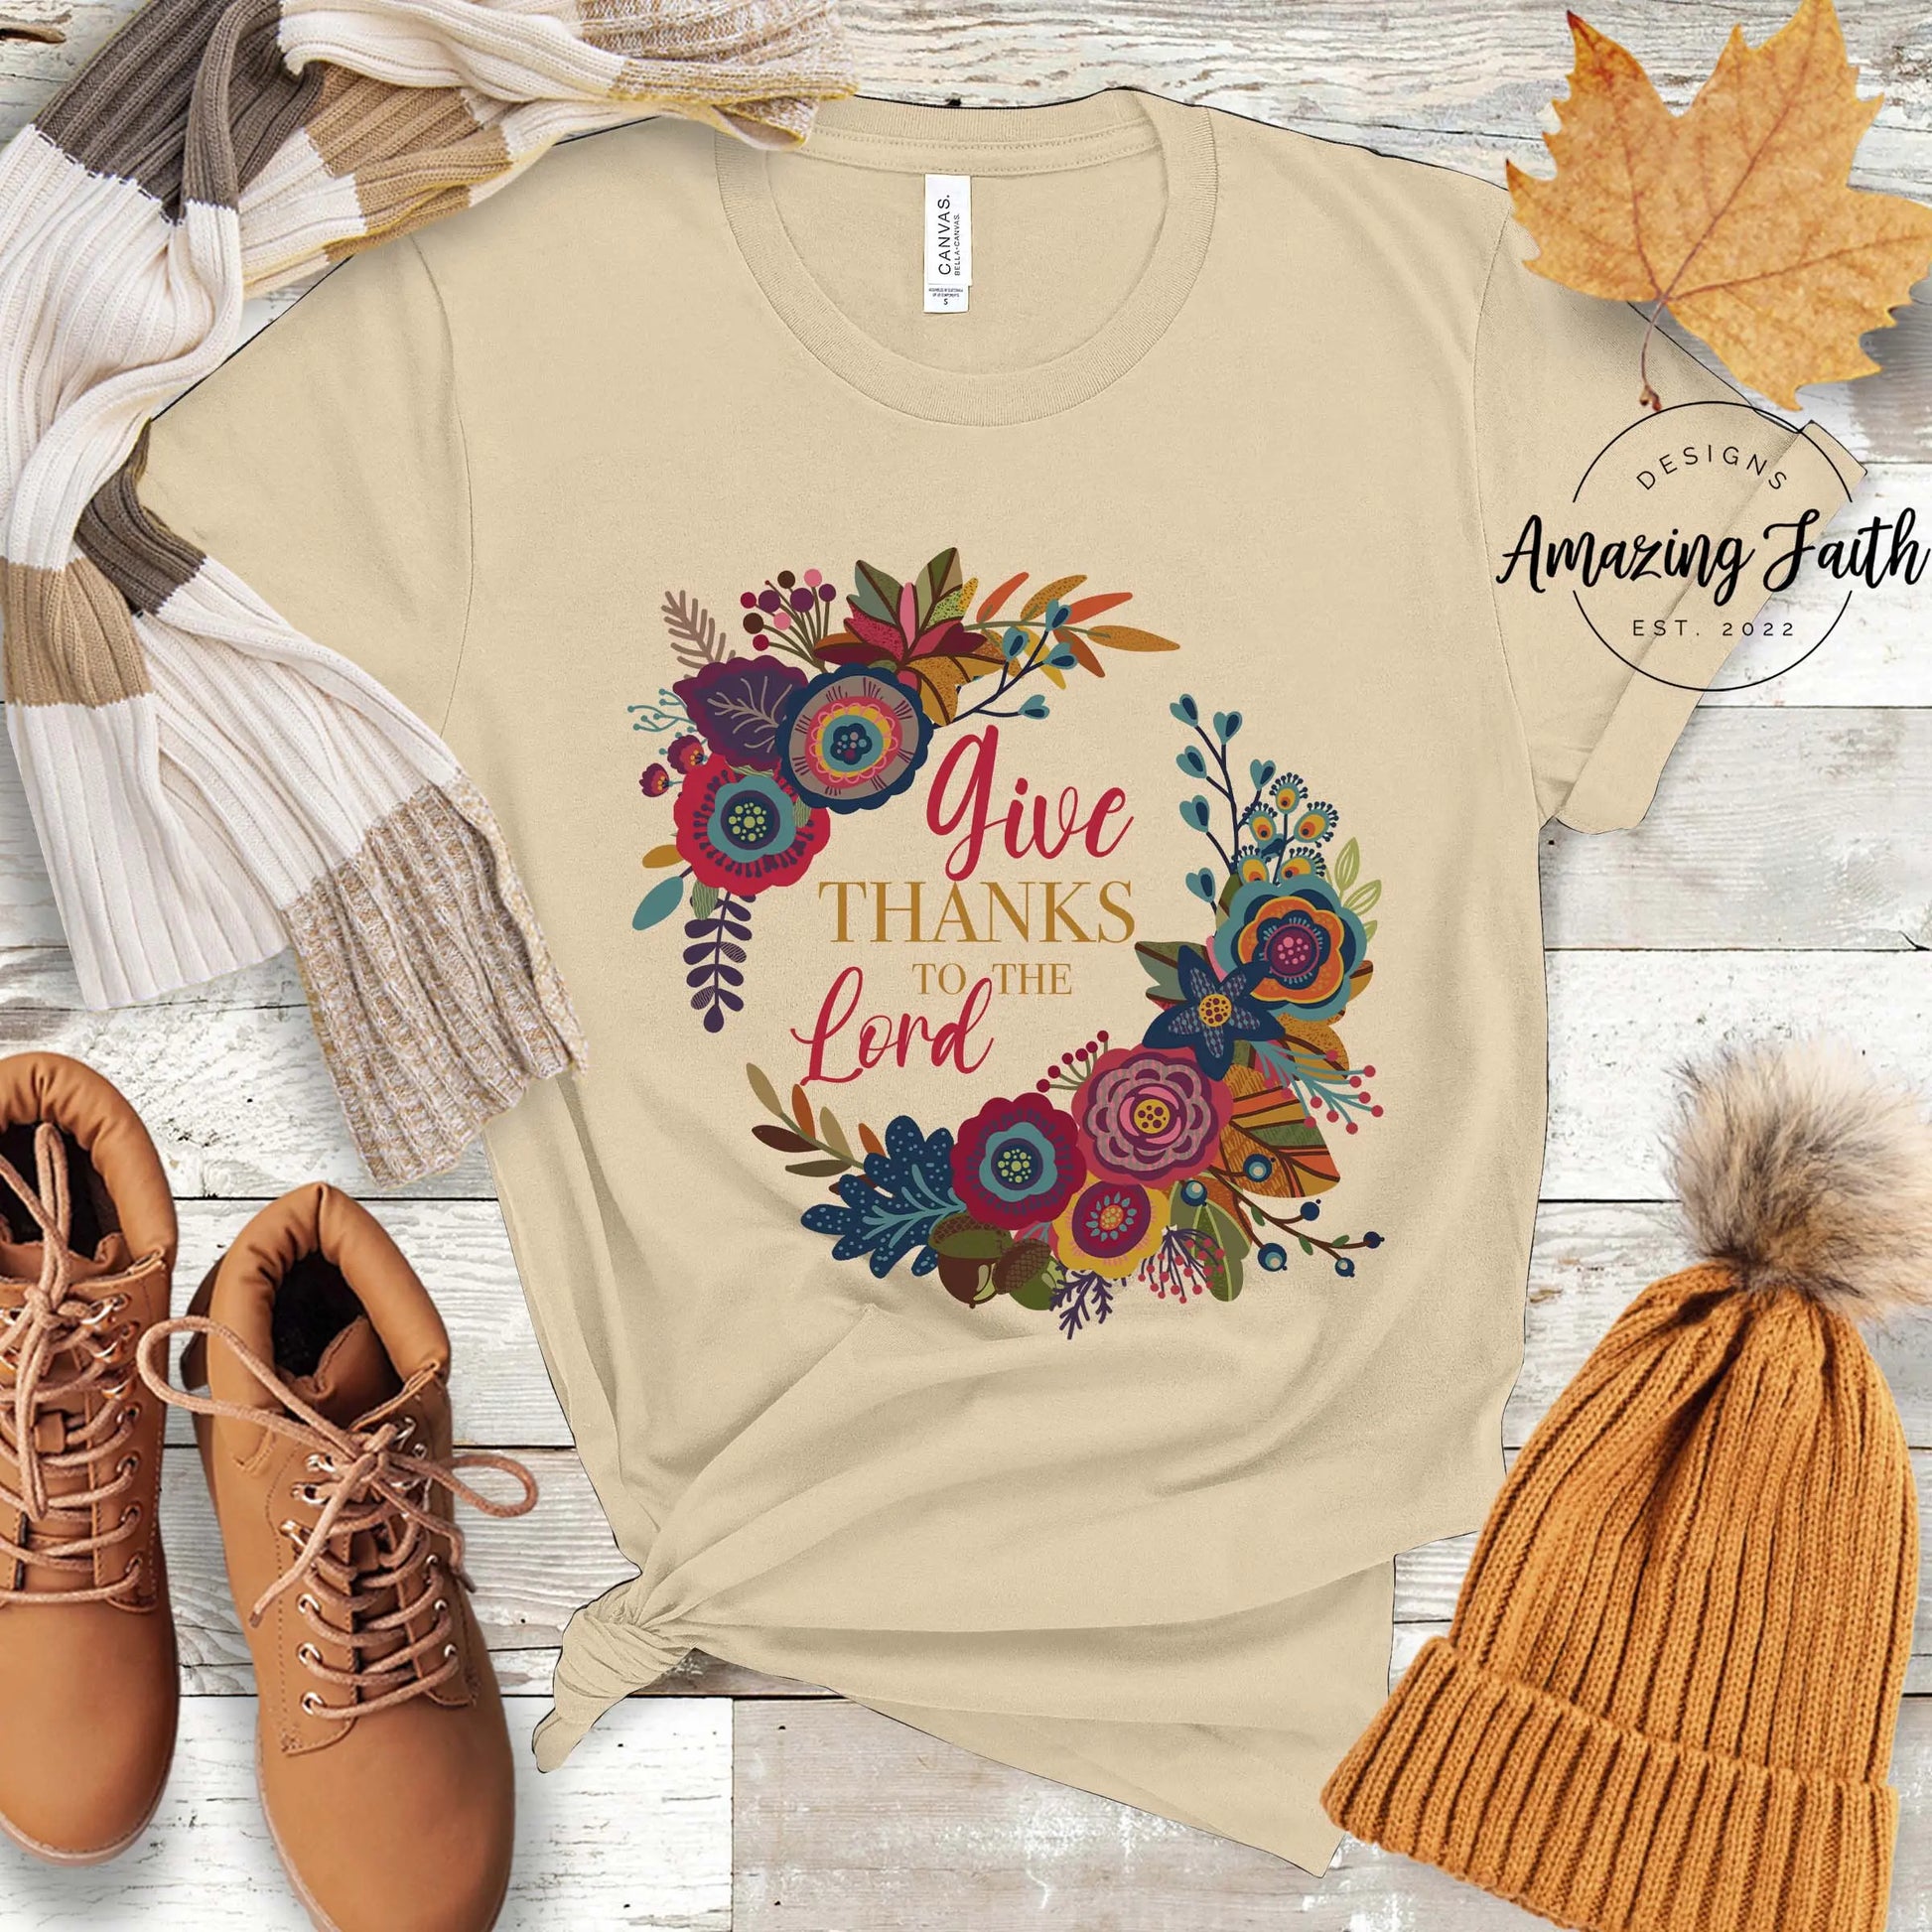 Give Thanks to the Lord T-shirt, Thanksgiving Tee Amazing Faith Designs